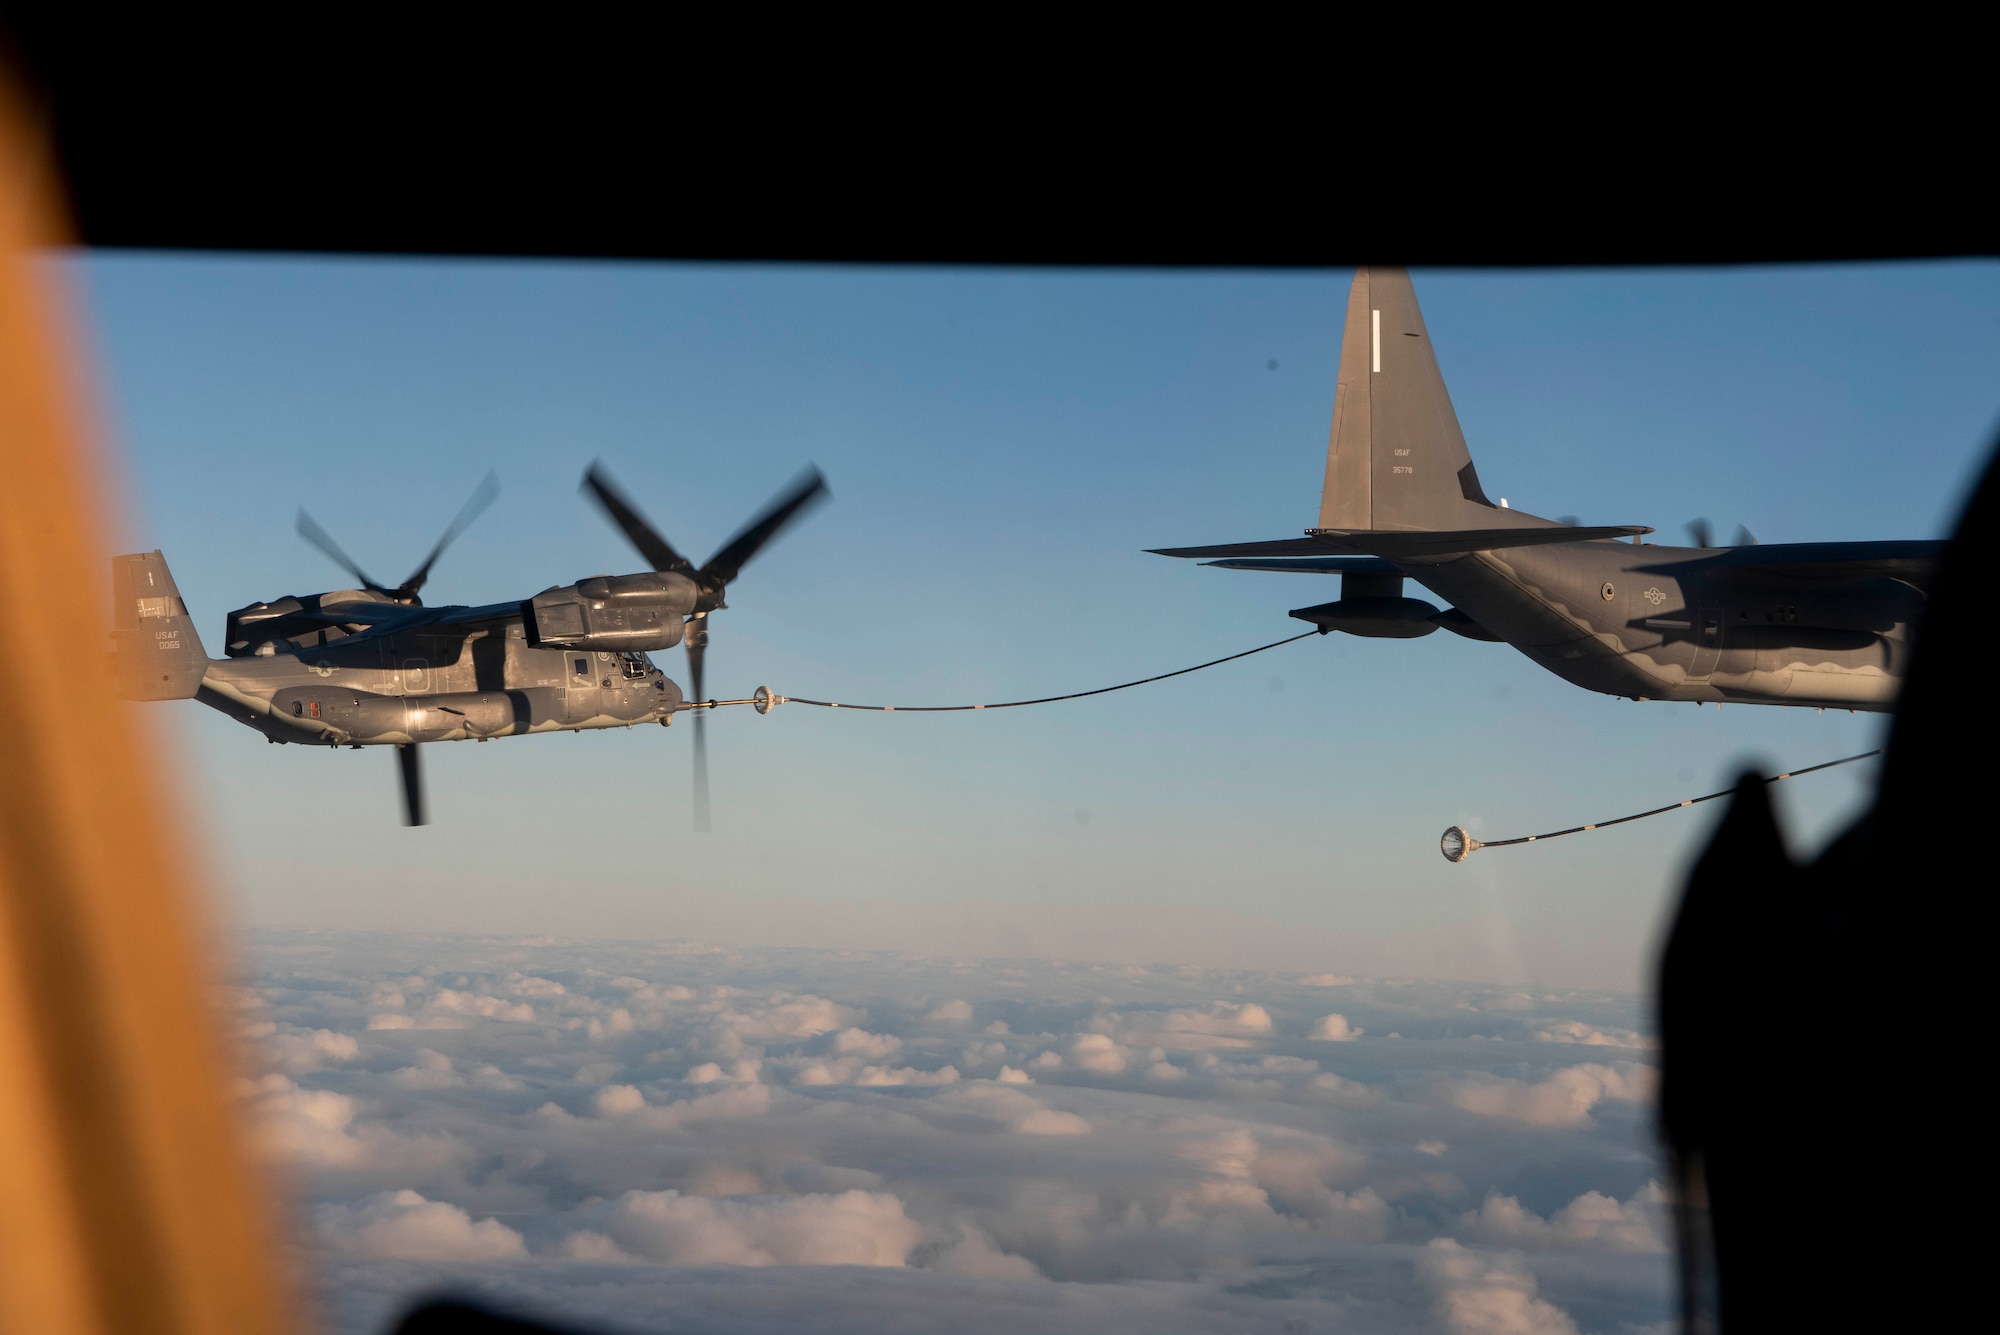 A MC-130J Commando II refuels a CV-22B Osprey, all based out of RAF Mildenhall, U.K., during a training exercise near Bodø, Norway, August 27, 2020. Integration with the Norwegian Air Force al-lowed the 352d Special Operations Wing to enhance and strengthen bonds with our partner nation and further secure the strategic high-north region. The exercise provided training for 352d Special Opera-tions Wing members on capabilities such as personnel recovery, forward area refueling point, aerial refu-eling, maritime craft delivery system, and fast rope training. (U.S. Air Force photo by Staff Sgt. Mi-chael Washburn)